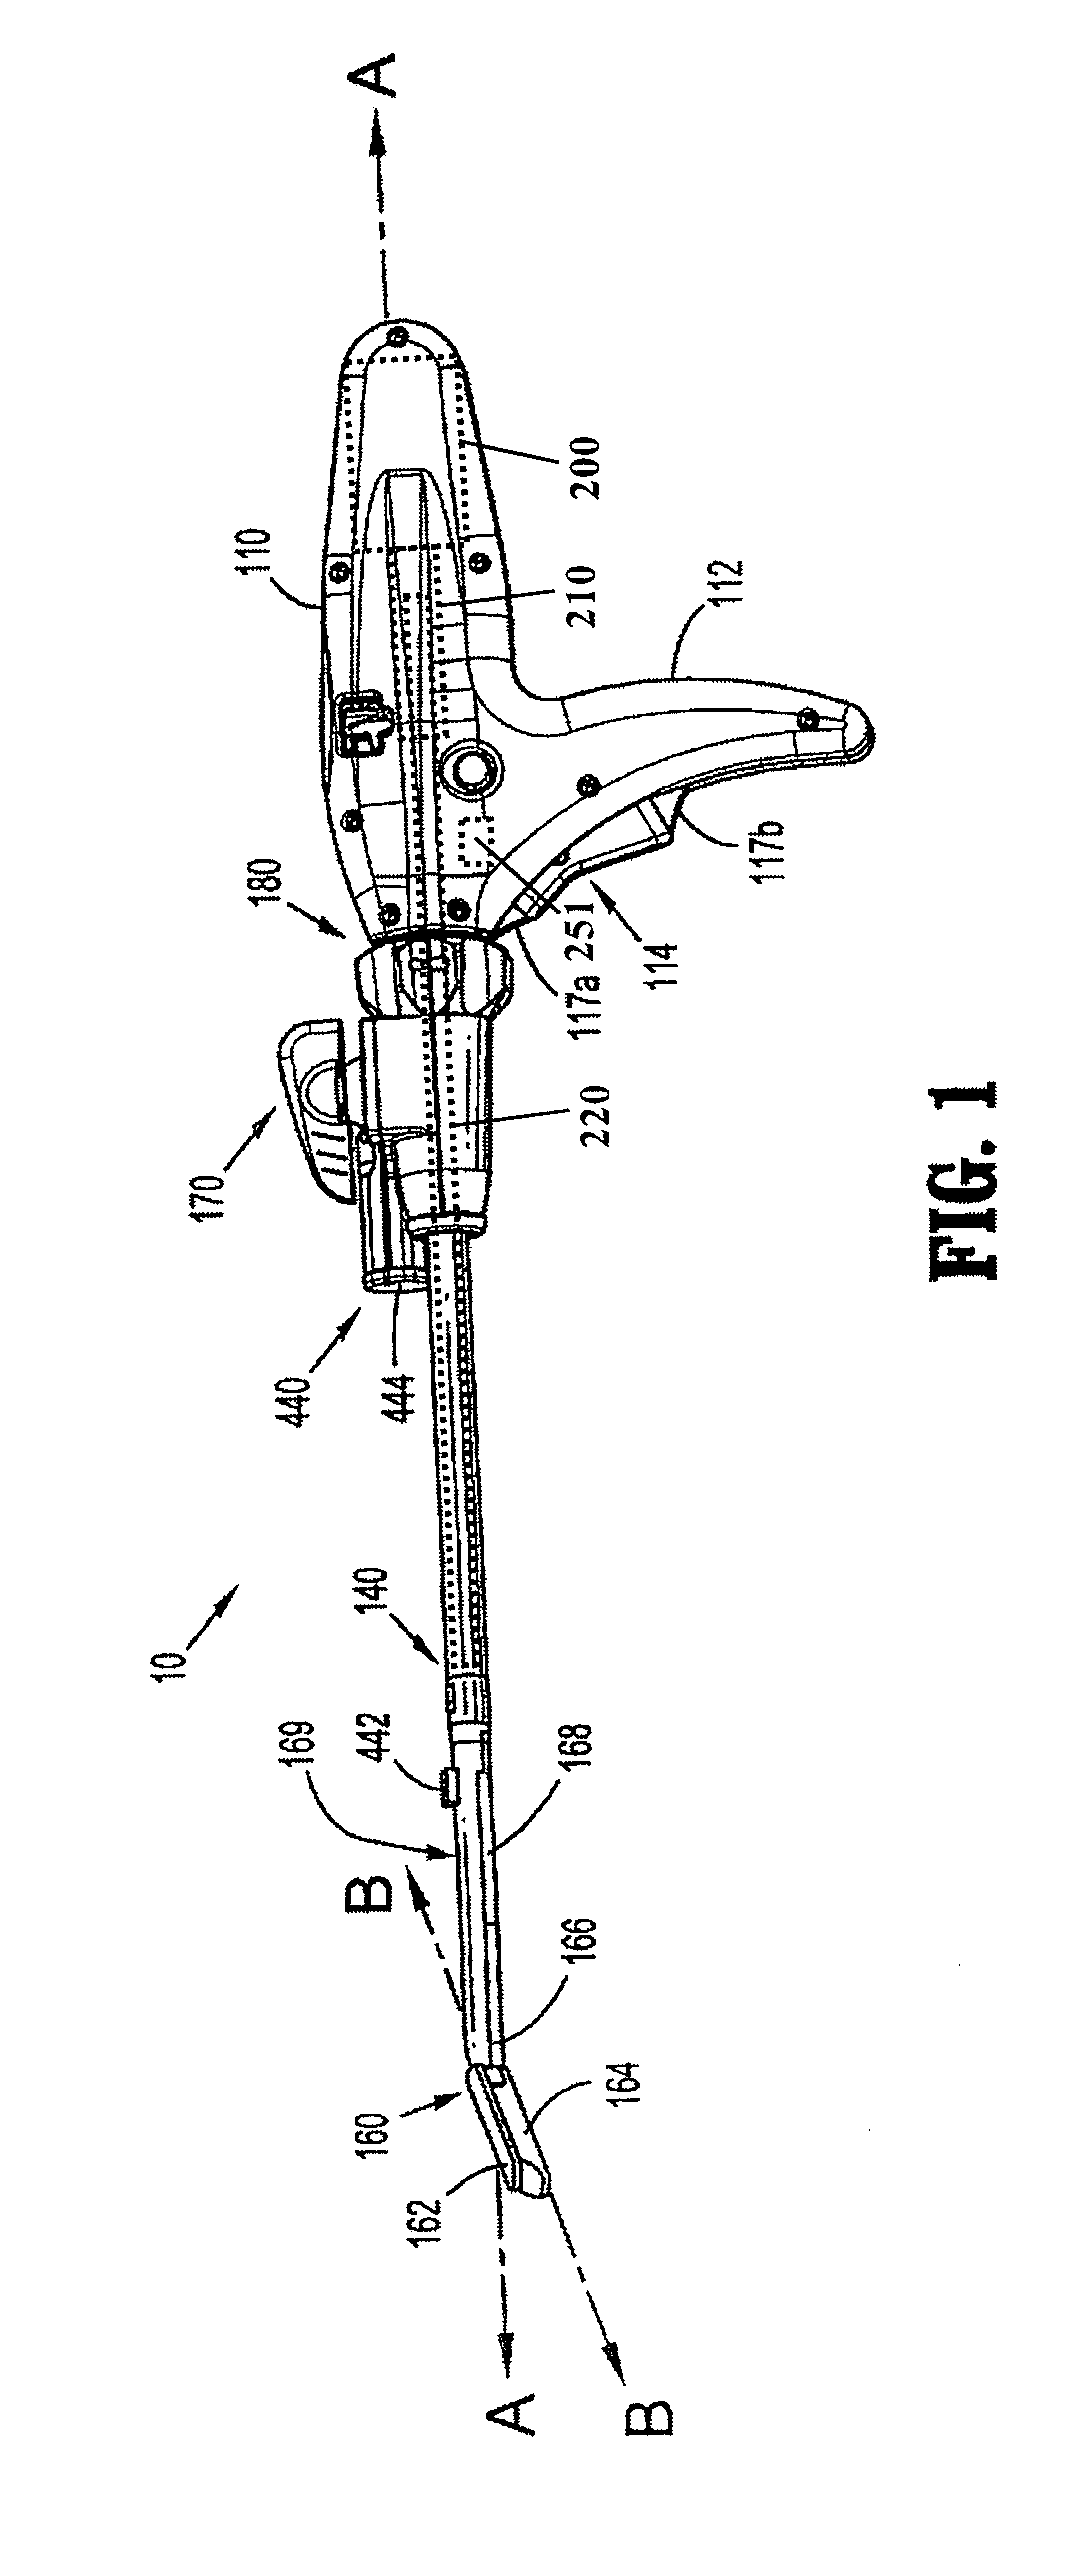 Method and apparatus for determining parameters of linear motion in a surgical instrument